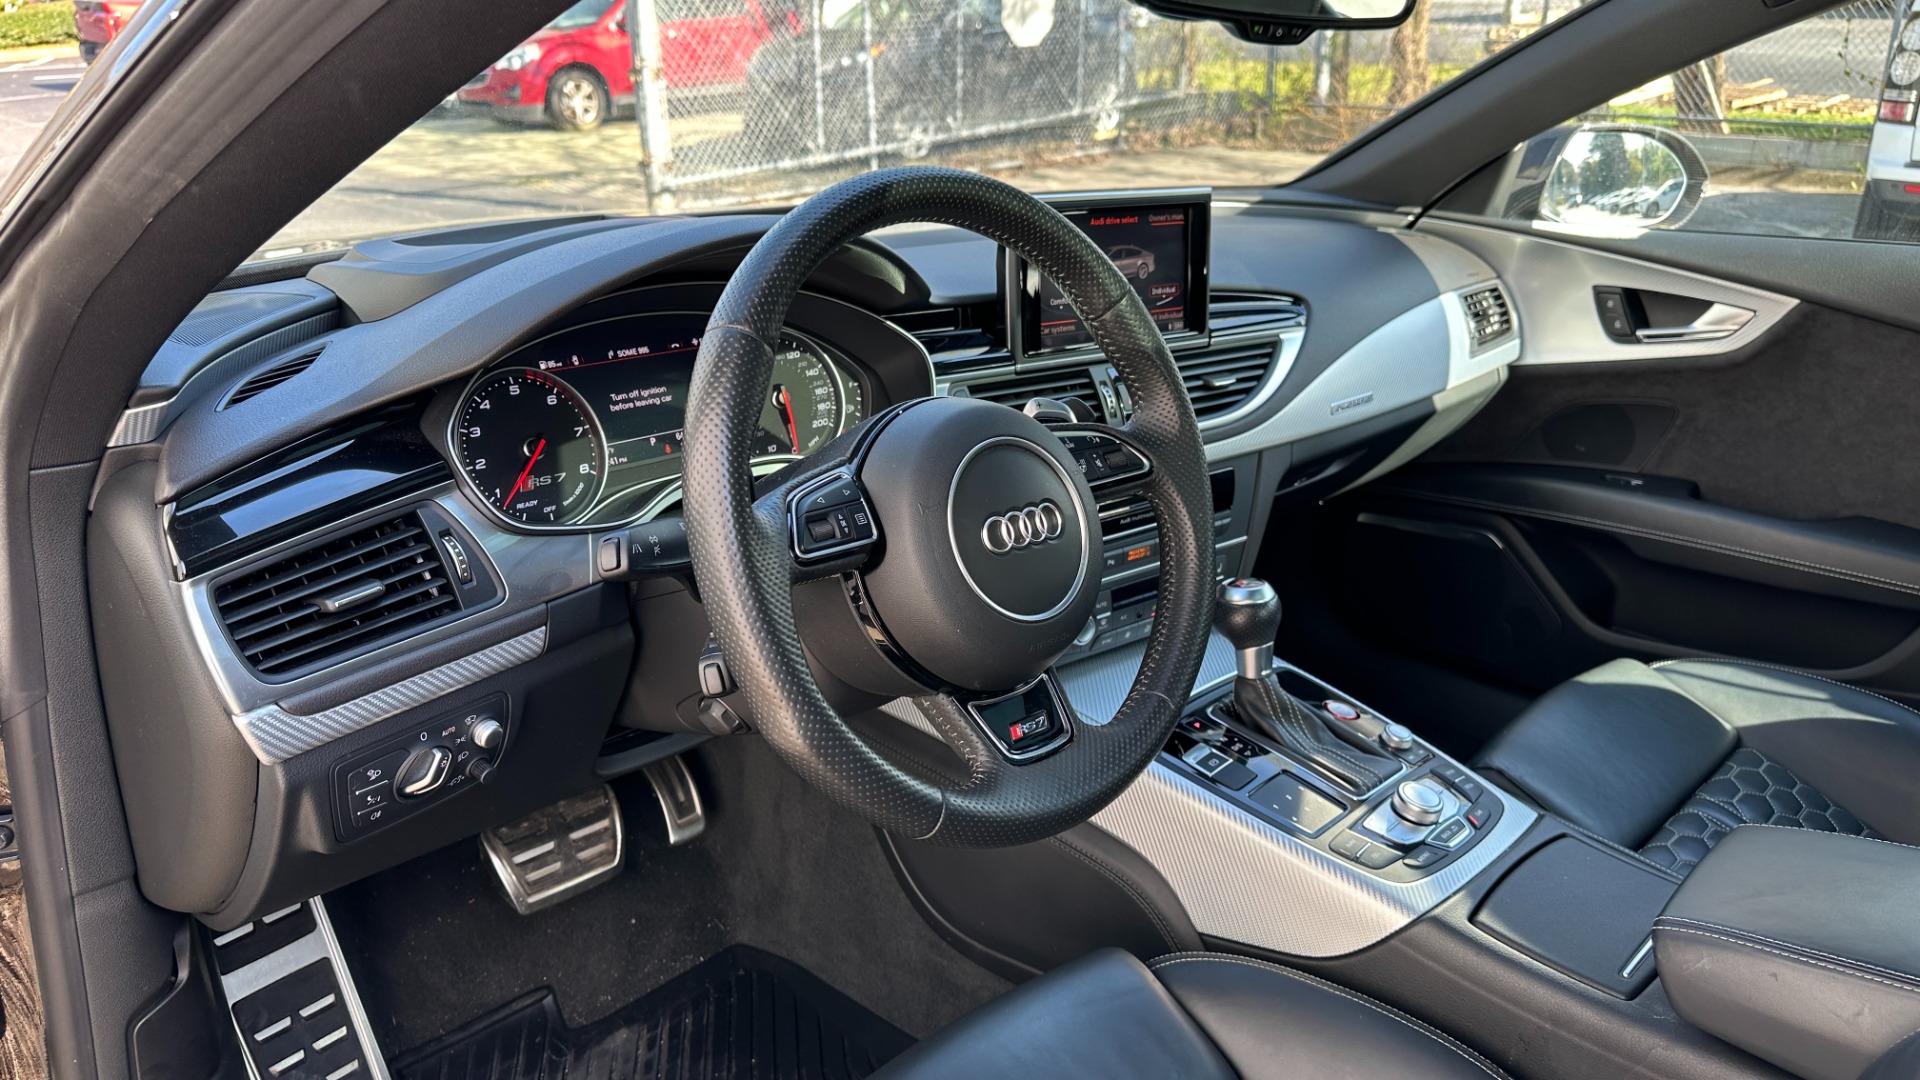 Used 2017 Audi RS 7 PERFORMANCE PRESTIGE / 4.0T 605HP / NIGHT VISION / DRIVER ASSIST / 21IN WHL for sale $80,995 at Formula Imports in Charlotte NC 28227 8